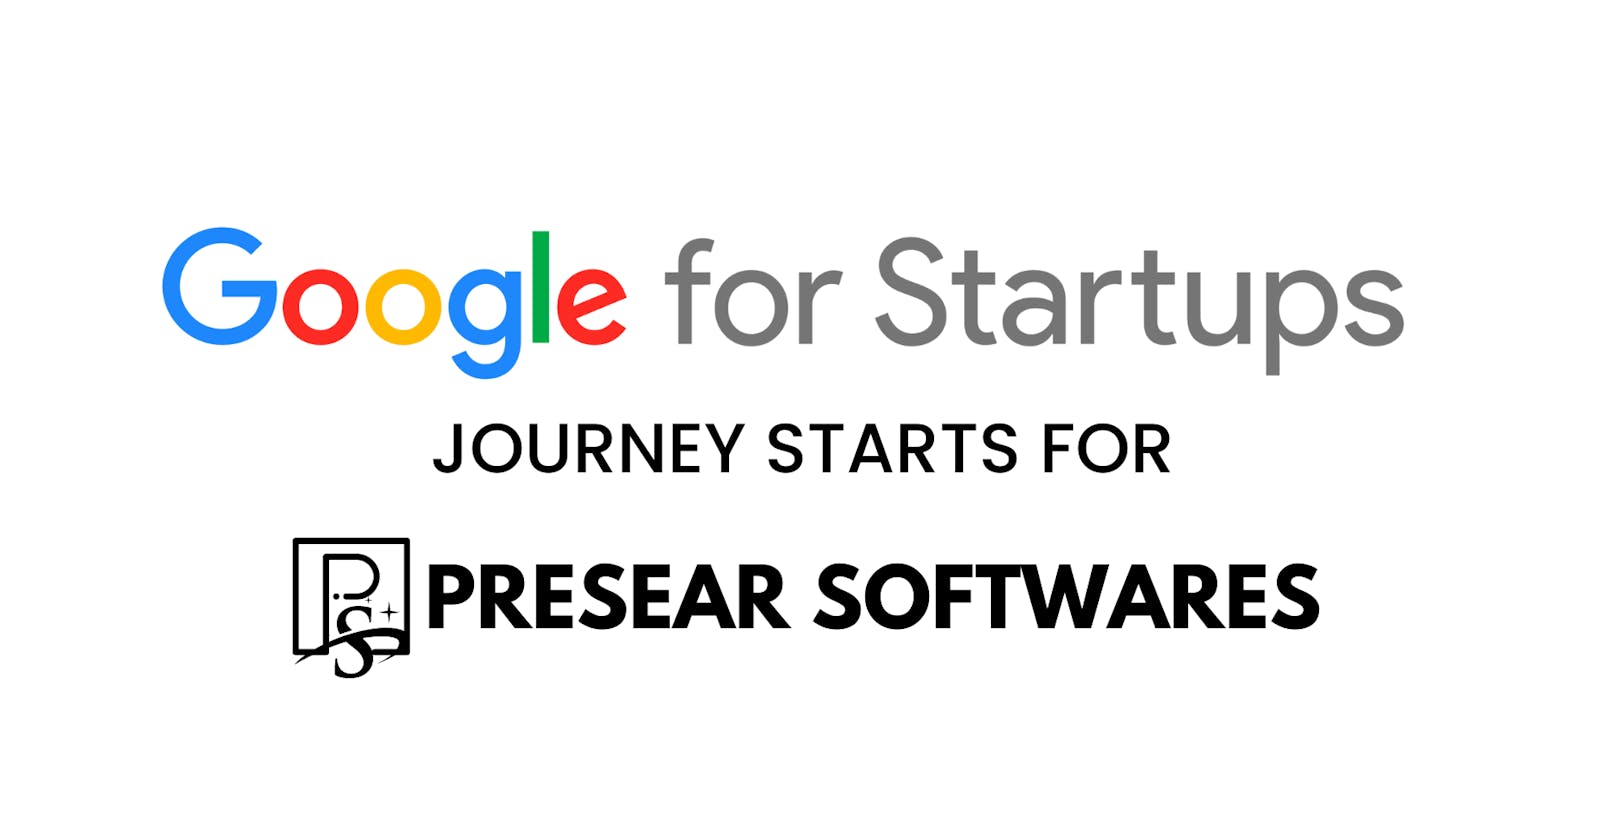 PSPL gets accepted into the Google For Startups Program with entitled funds of $100k per year for two years and  mentoring from Google experts